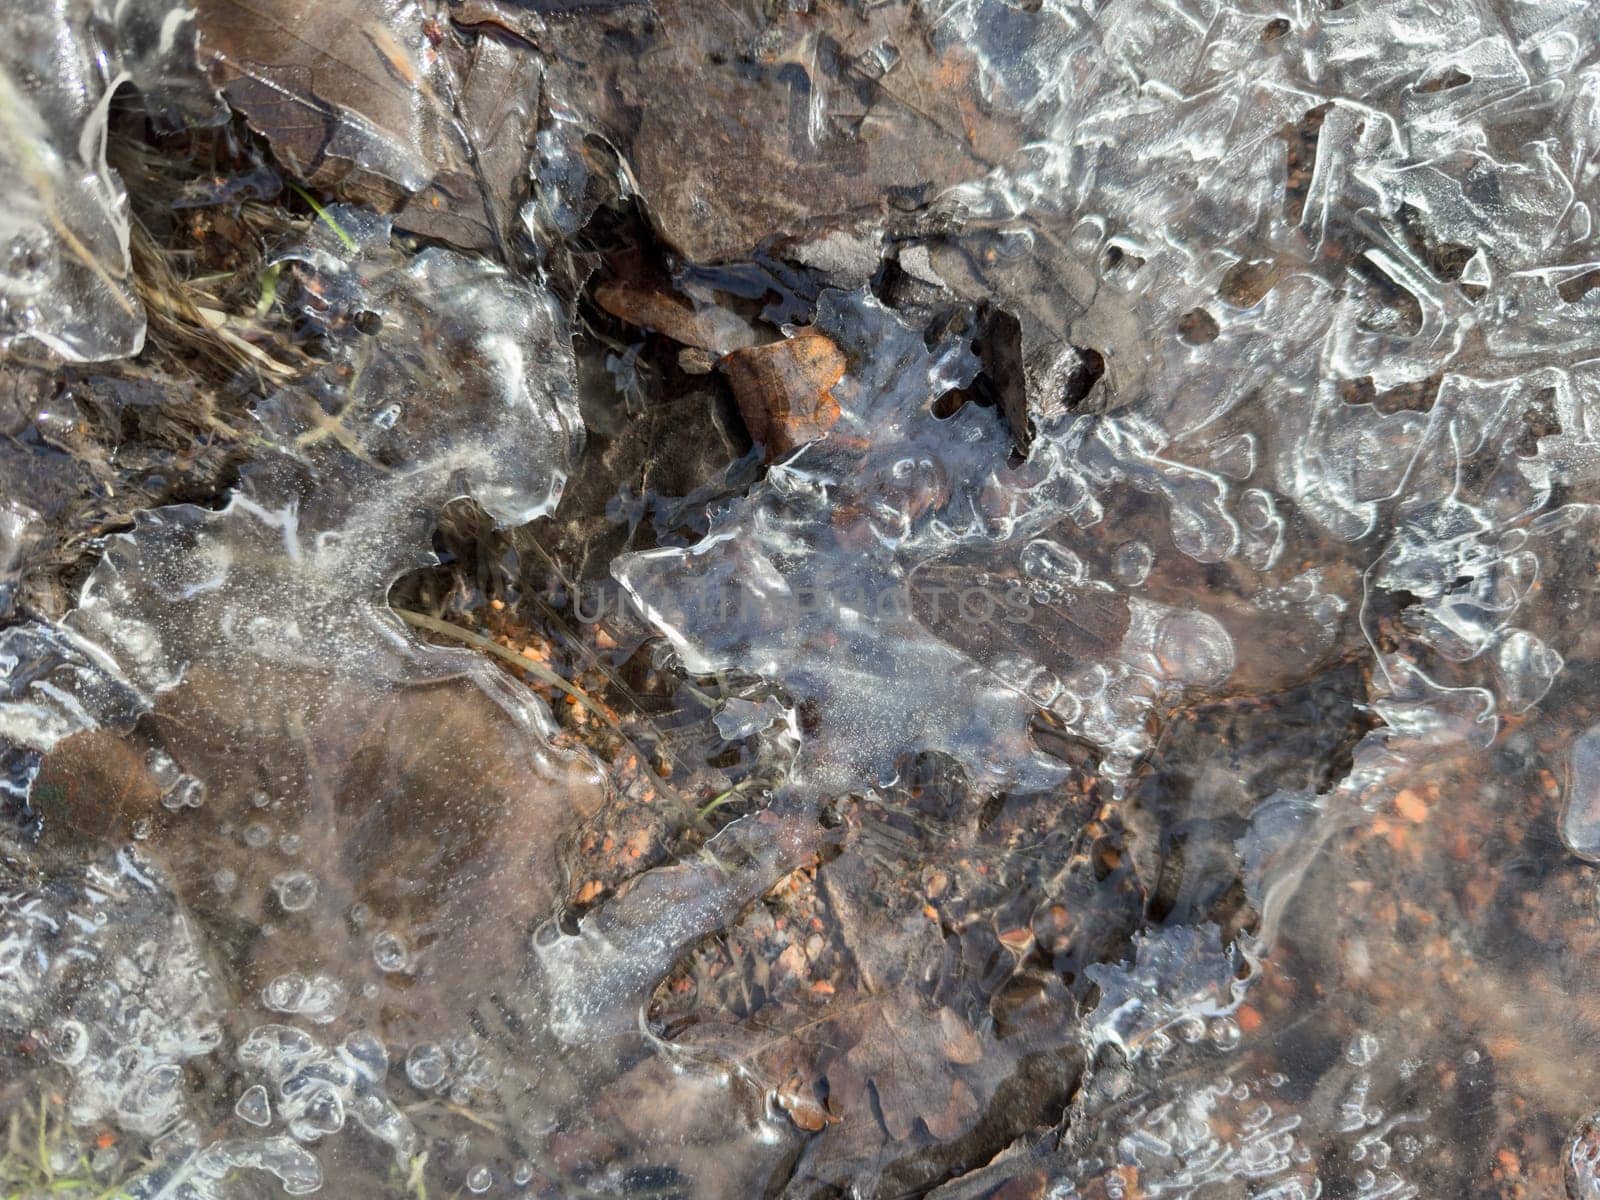 thin transparent ice on a puddle in the park on a spring day, foliage through the ice, dry grass through ice. High quality photo